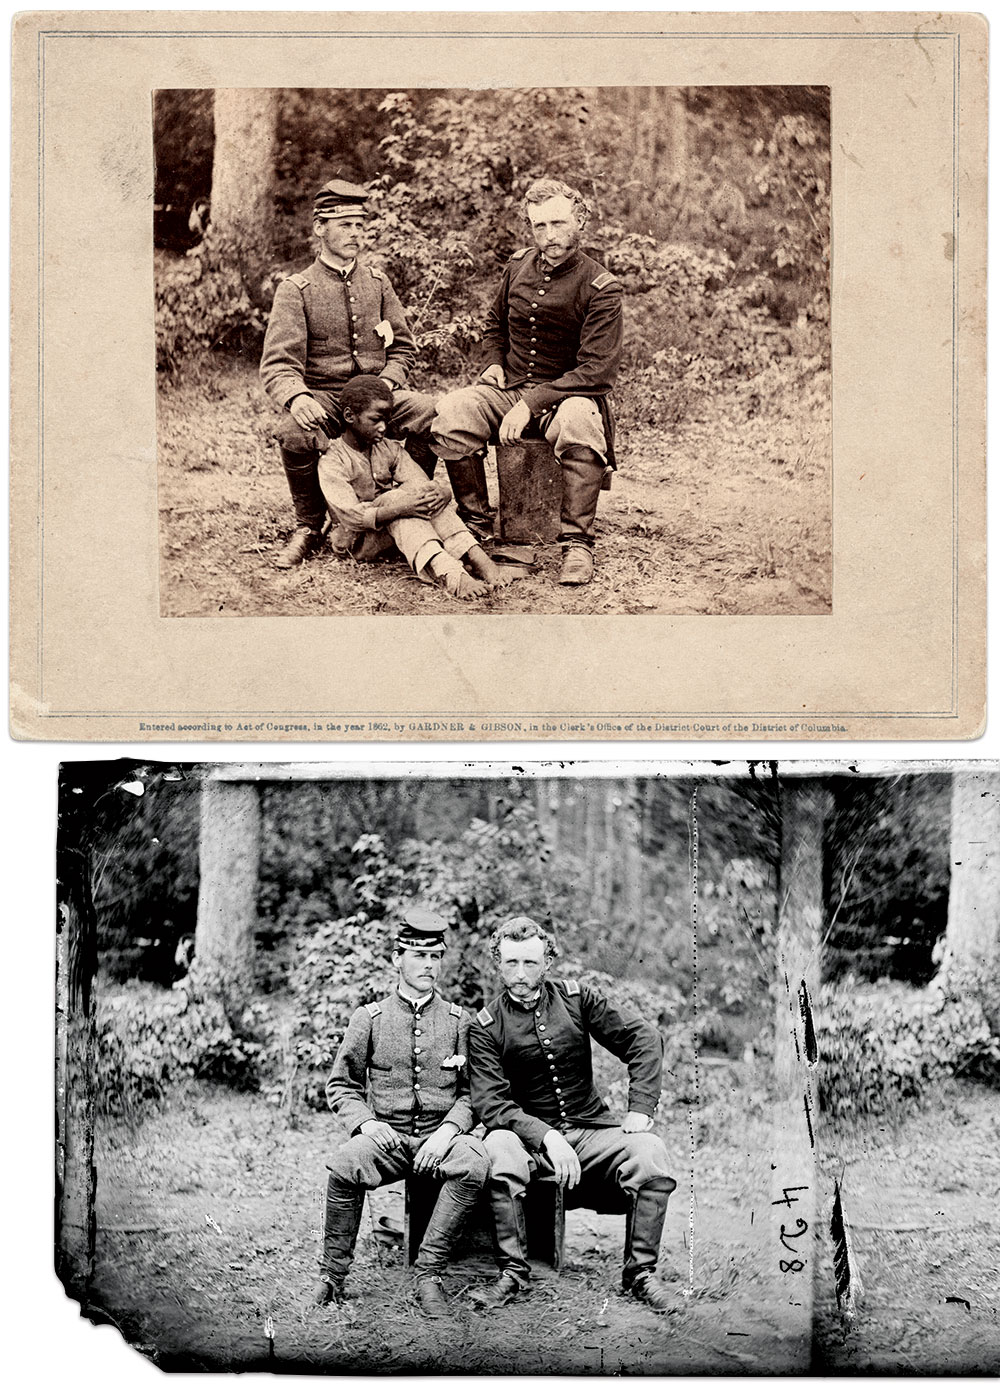 Custer’s account suggests that he and Washington posed with the child first, and then for a second portrait without him present. Albumen print (top) by Alexander Gardner and James F. Gibson of Washington, D.C., Metropolitan Museum of Art, Glass plate negative by James  F. Gibson of Washington, D.C.  Library of Congress.